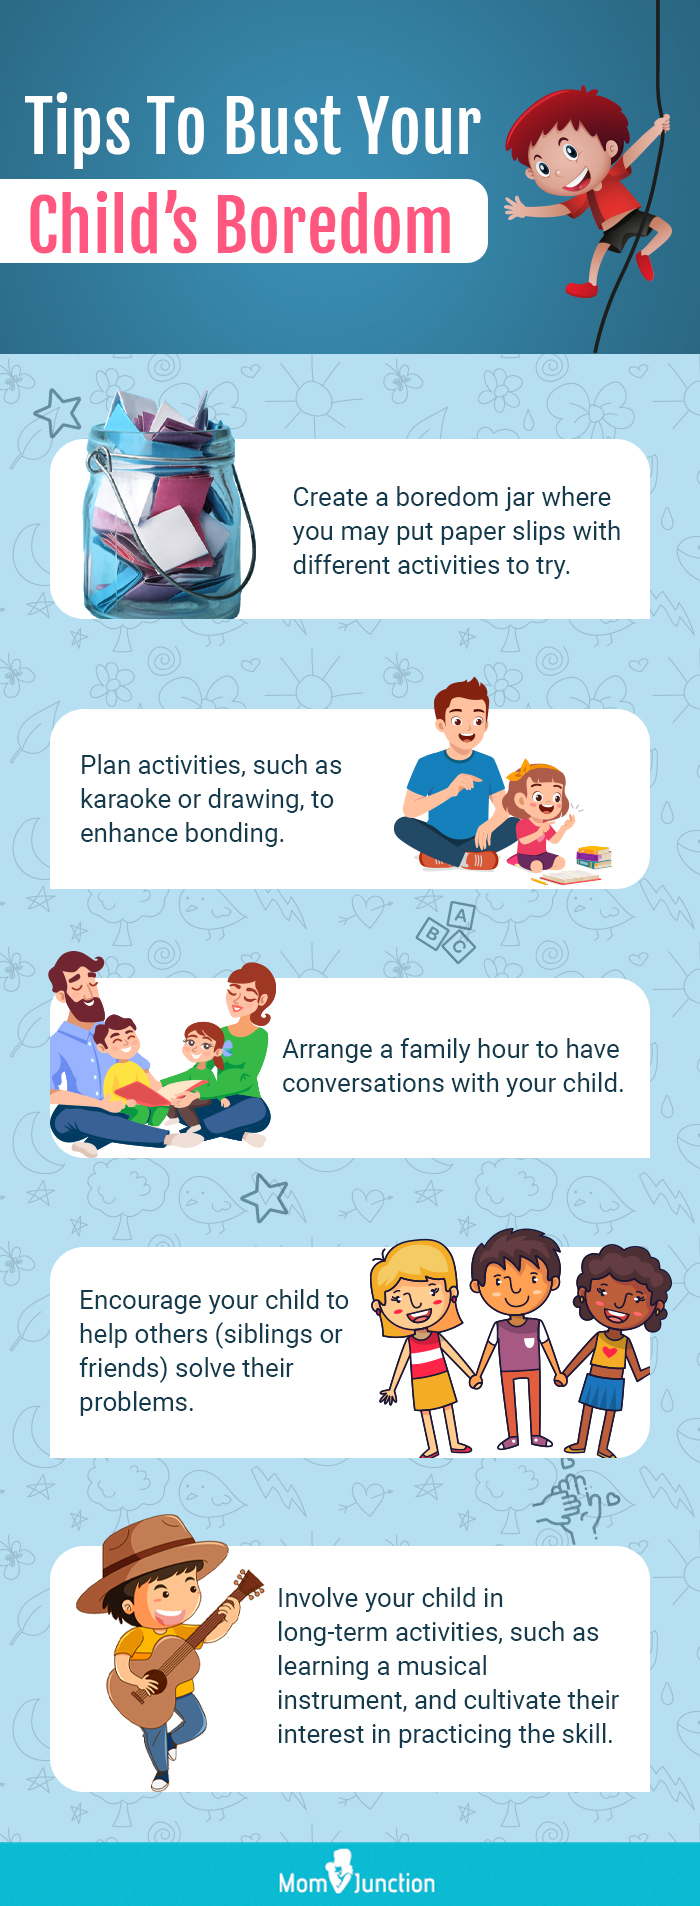 tips to bustyour childs boredom in a smart way (infographic)